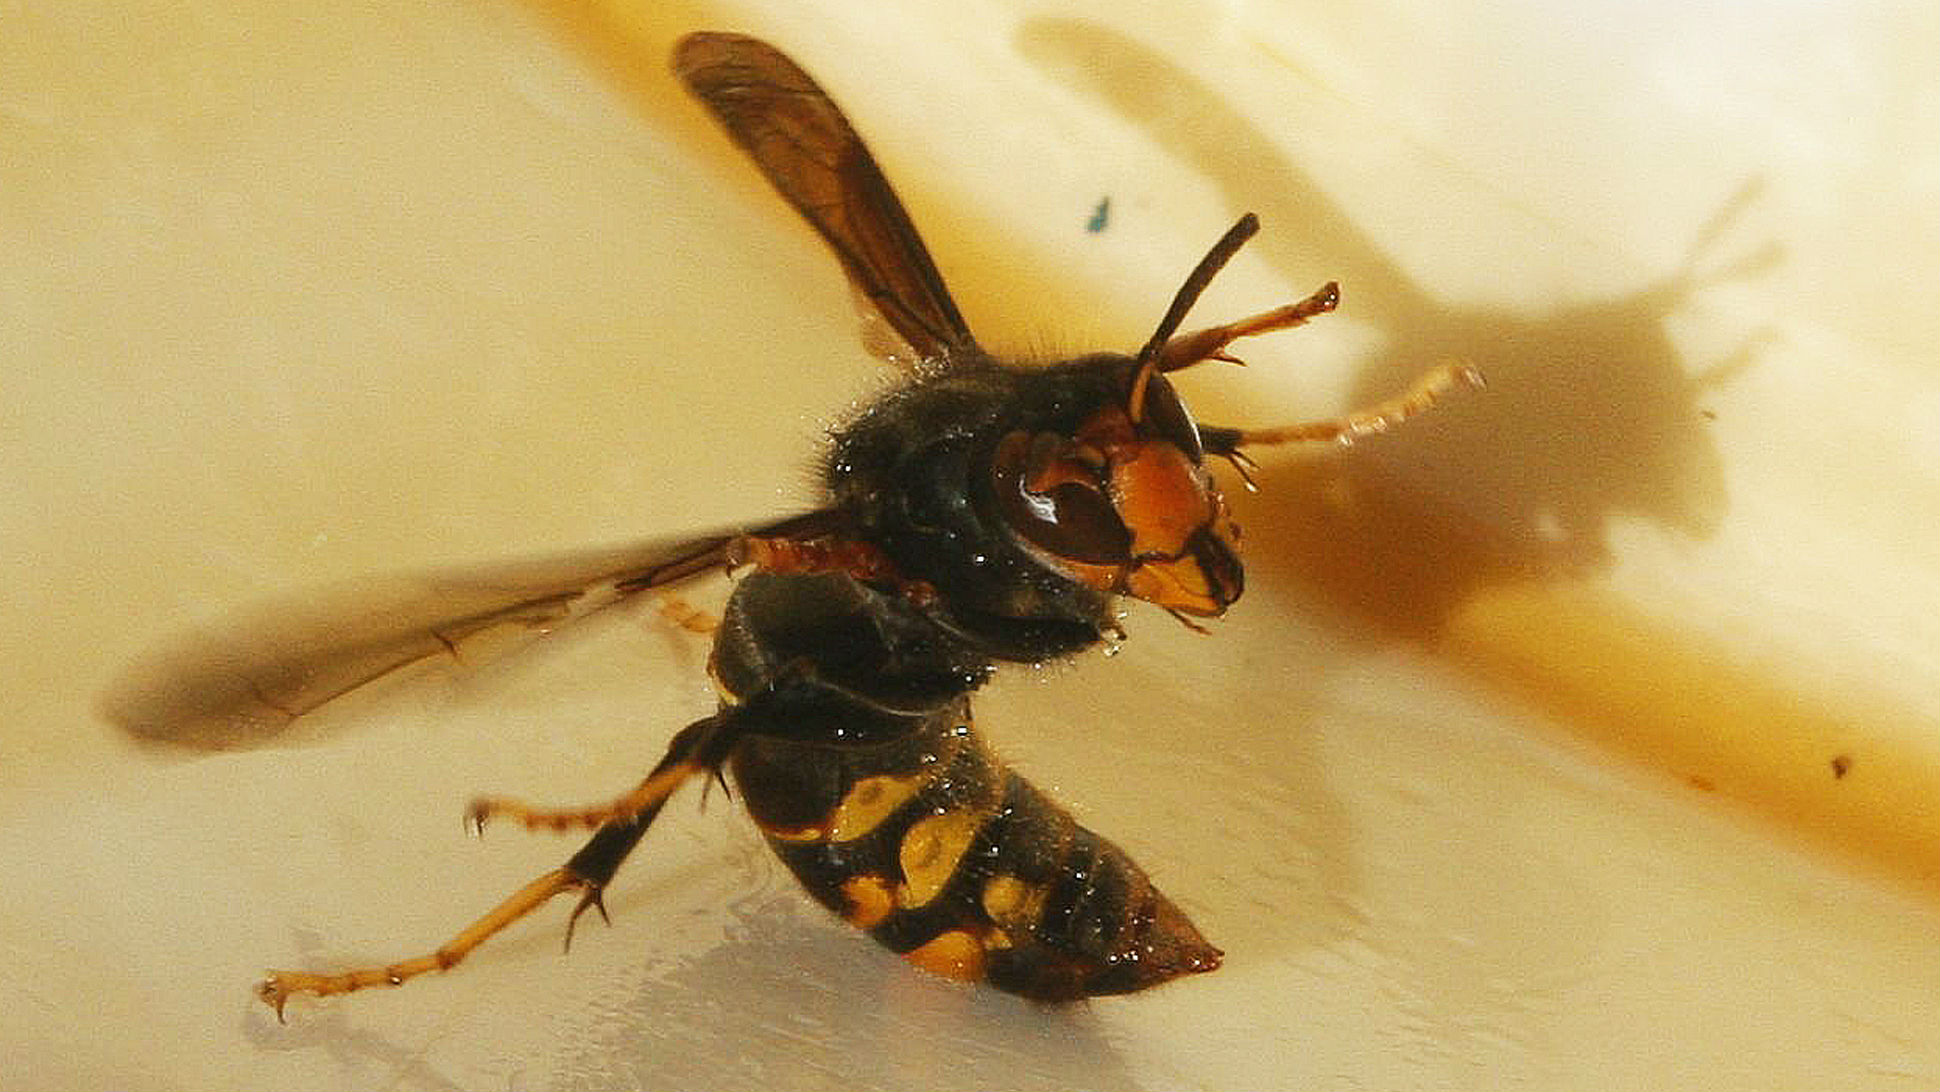 Reports show the vicious Asian hornet is spreading through France and likely to cross into Britain. Channel 4 News looks at several non-native species that have been spotted in the UK in recent years.